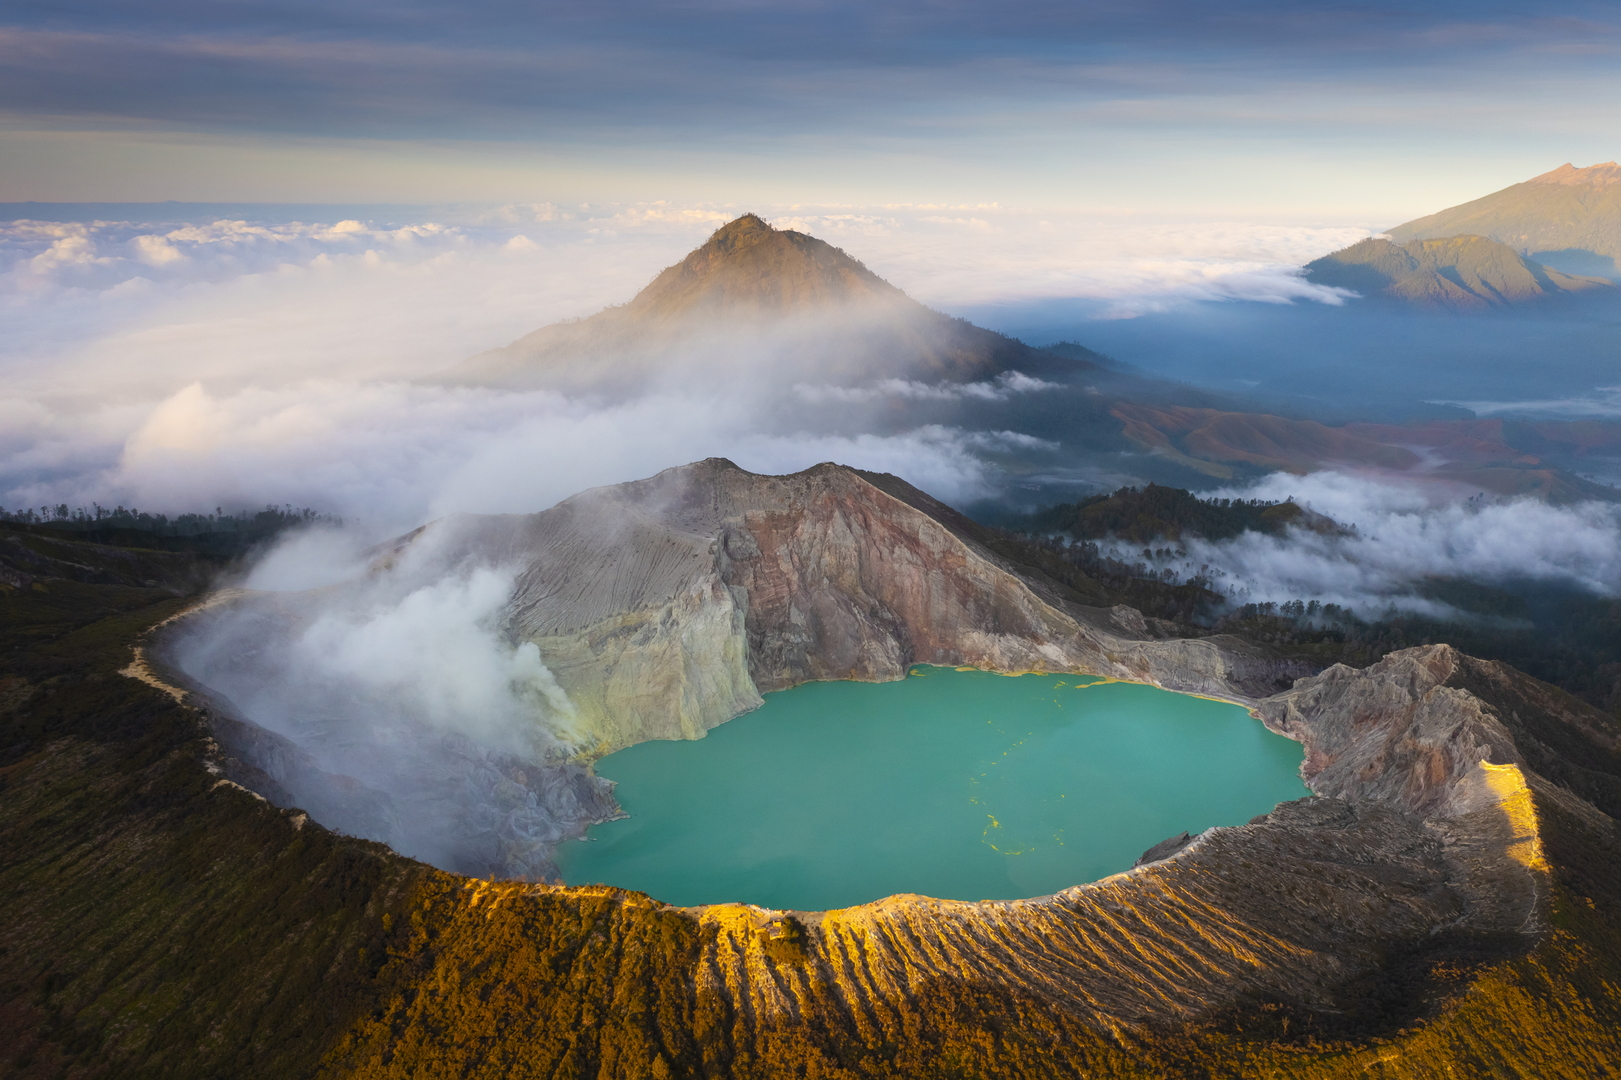 Aerial view of Misty Volcano of Kawah Ijen crater in East Java, Indonesia